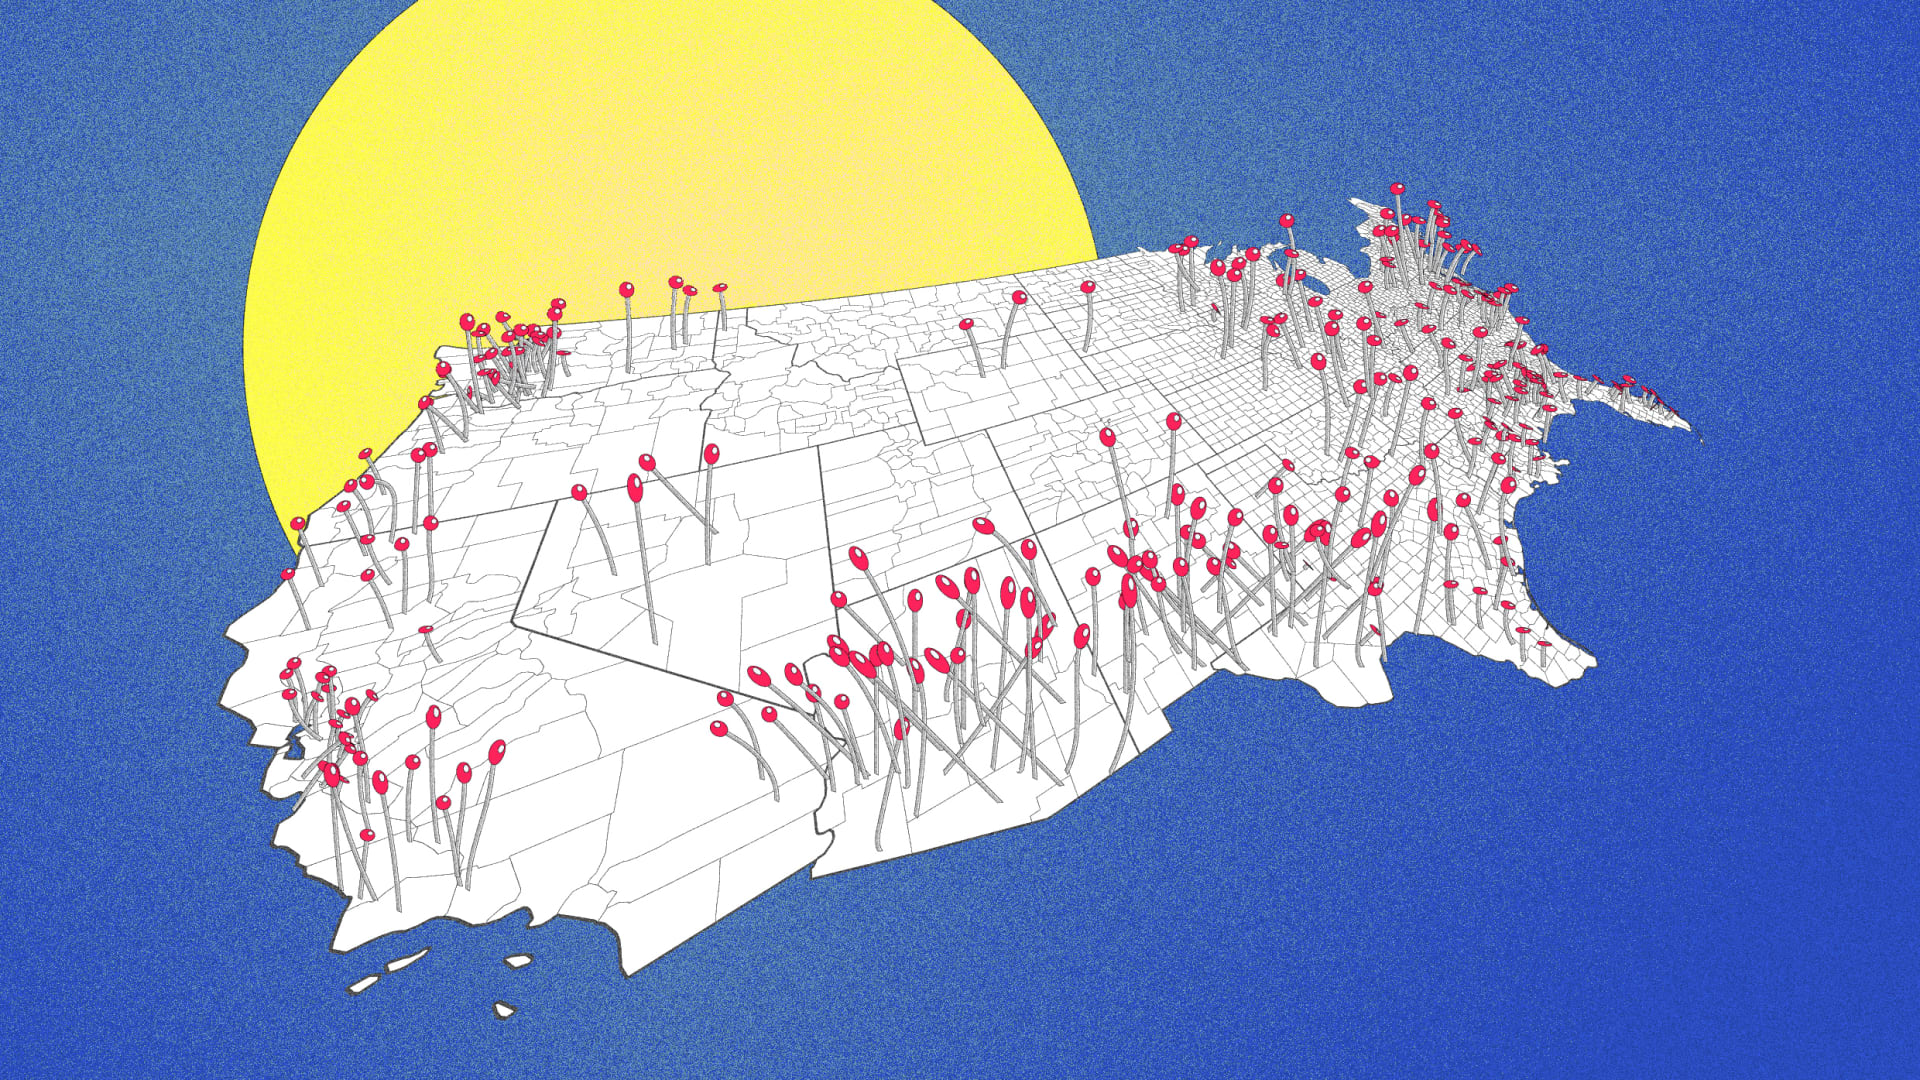 Do you live in a COVID-19 hotspot? Harvard created a simple map that will tell you